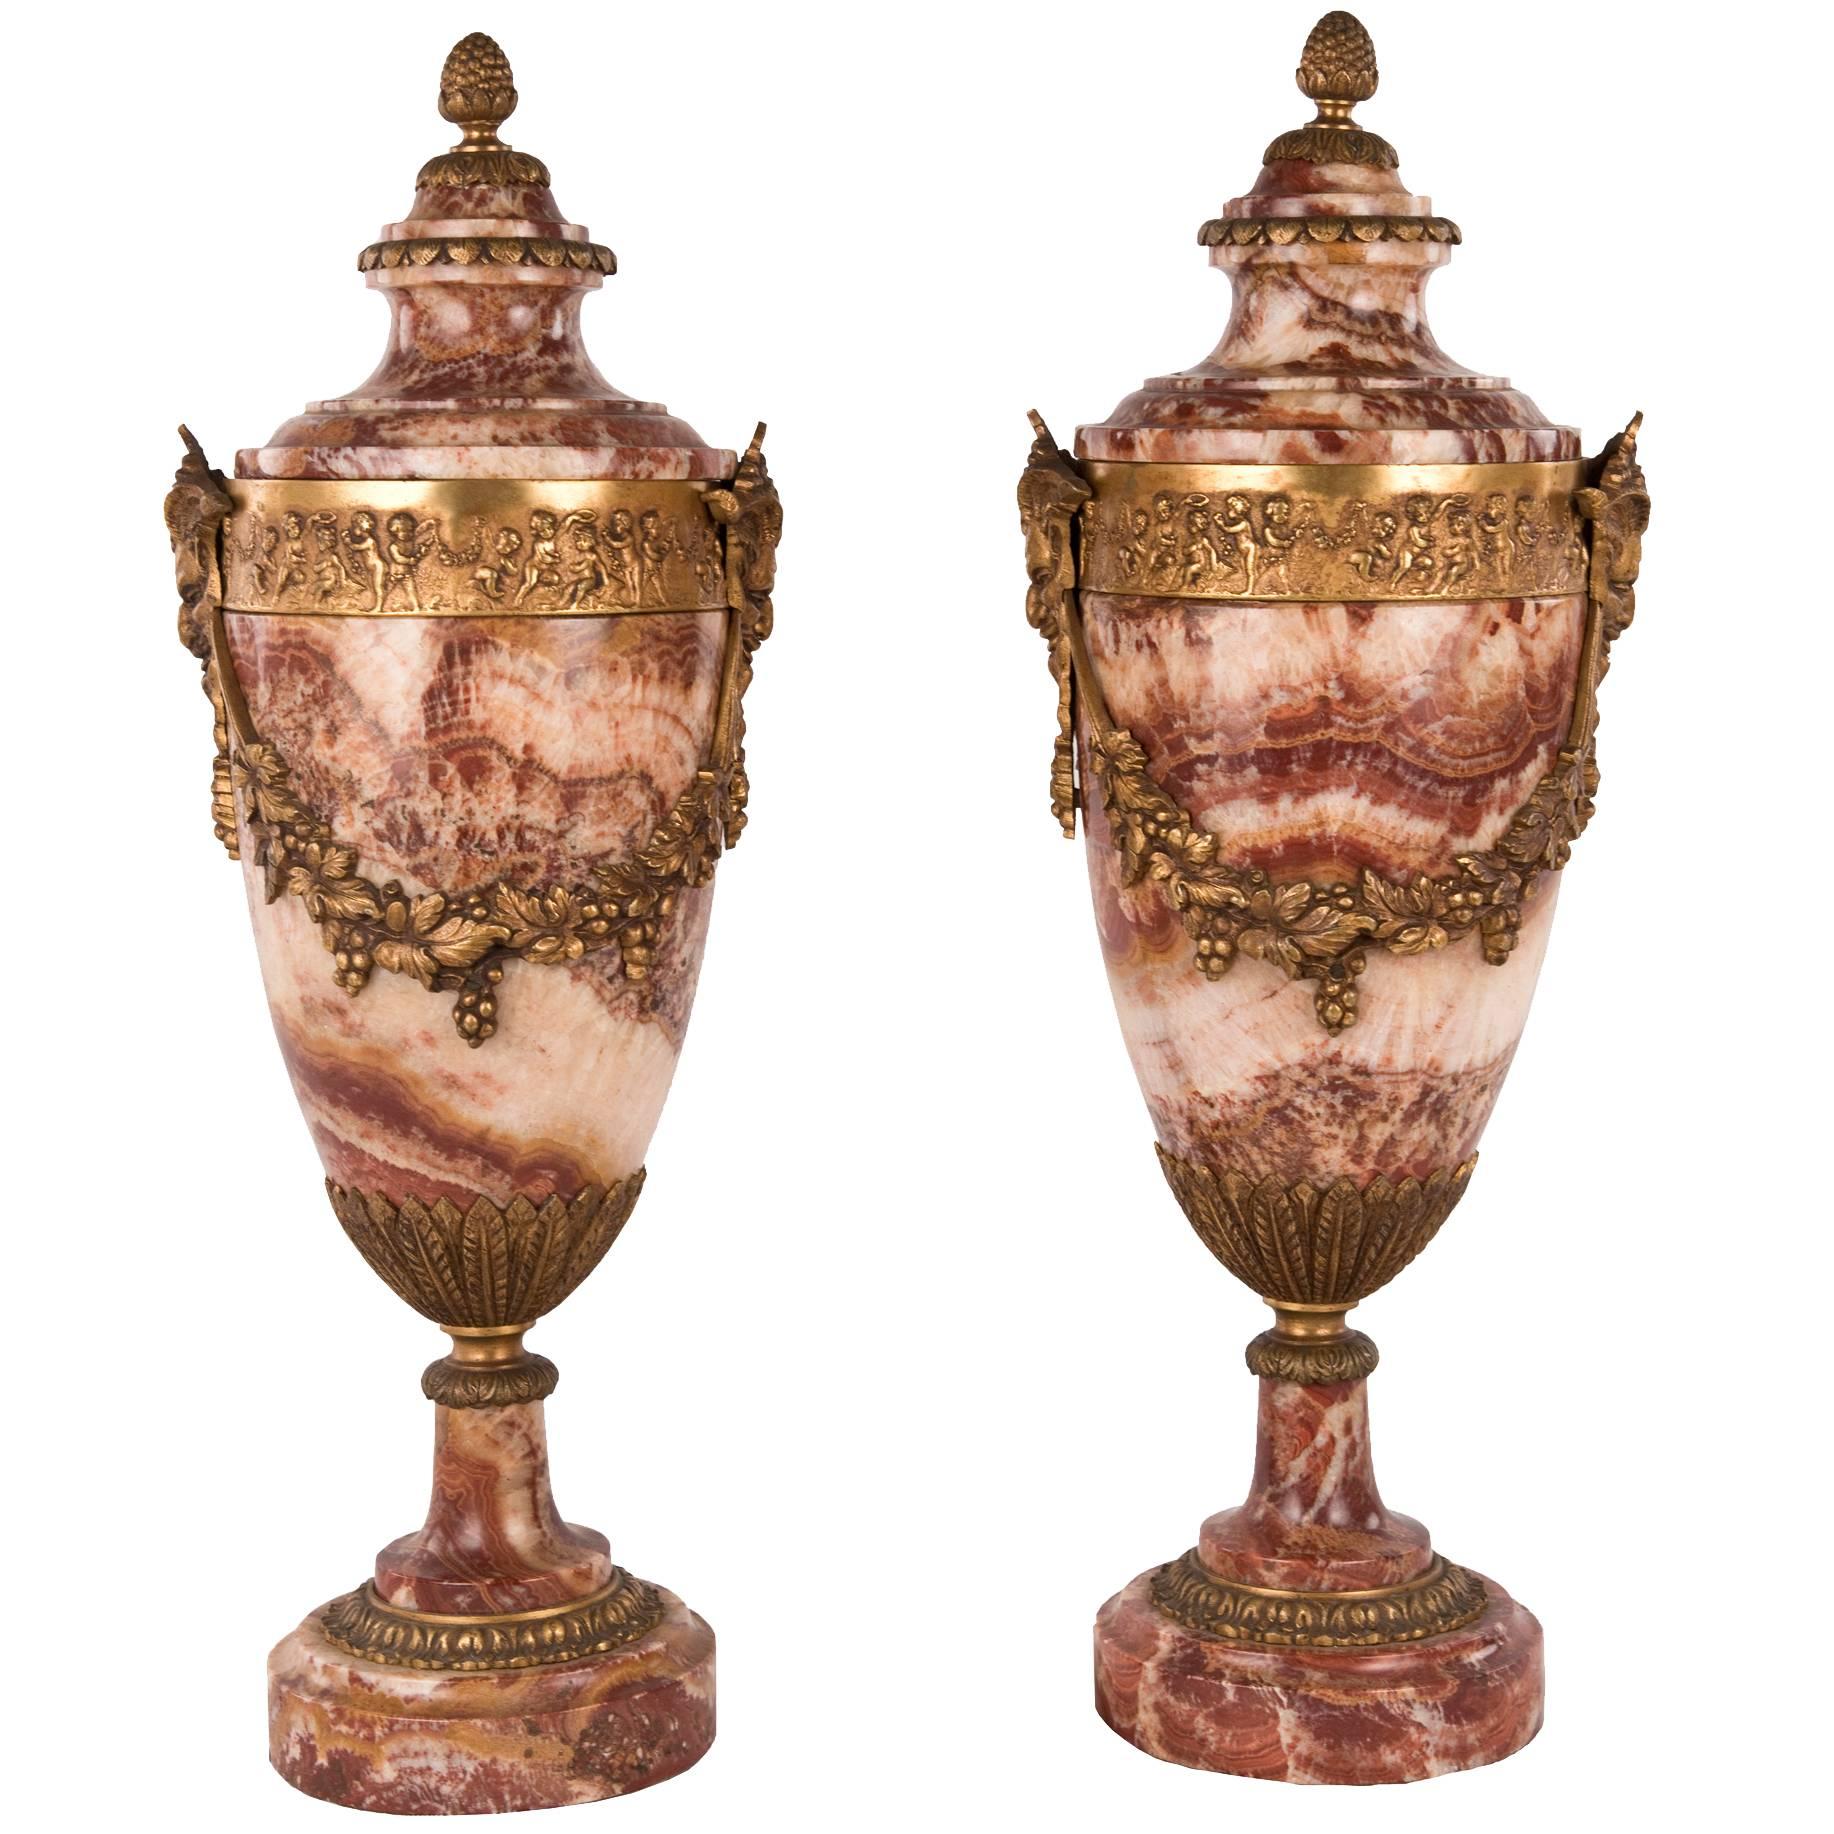 Pair of Louis XVI Style Marble and Ormolu Urns